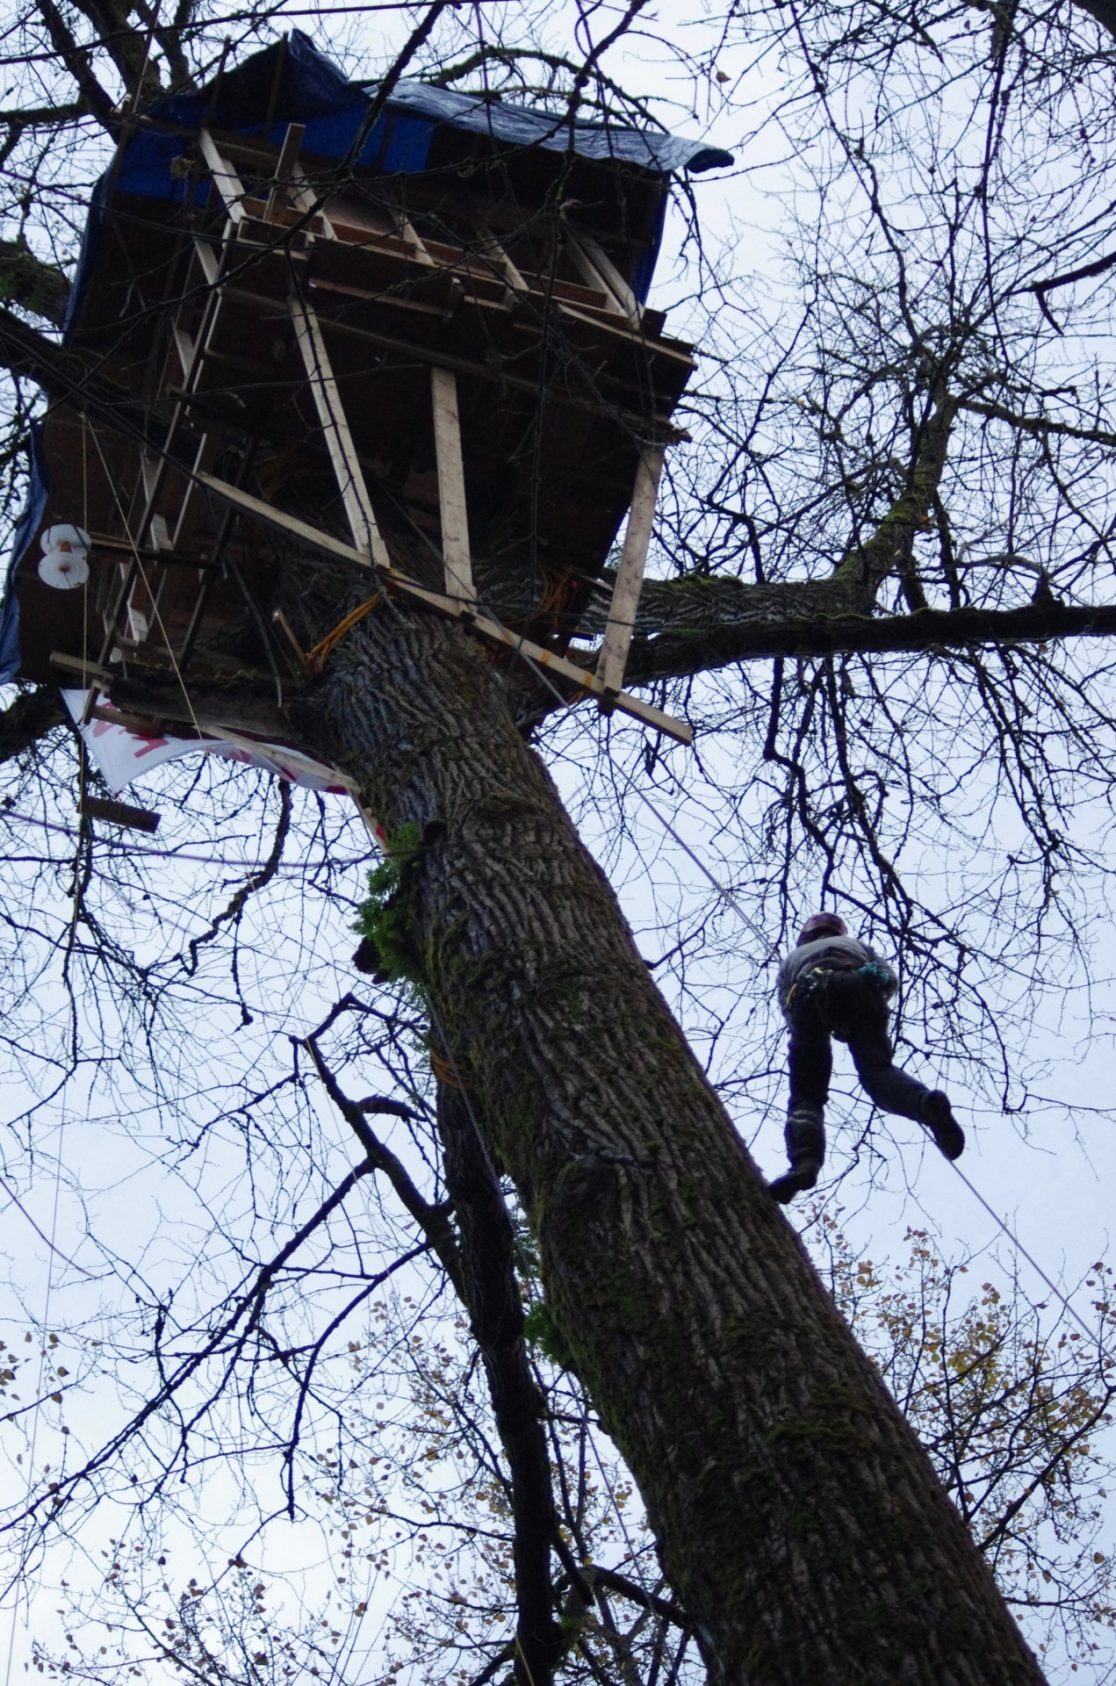 We look up at a tall old tree. Its branches are bare of leaves. There's a tree house in the grey sky and a person is dangling next to the tree. This is a photo of a treesitting action in the path of extractive development in Burnaby, British Columbia, Canada.